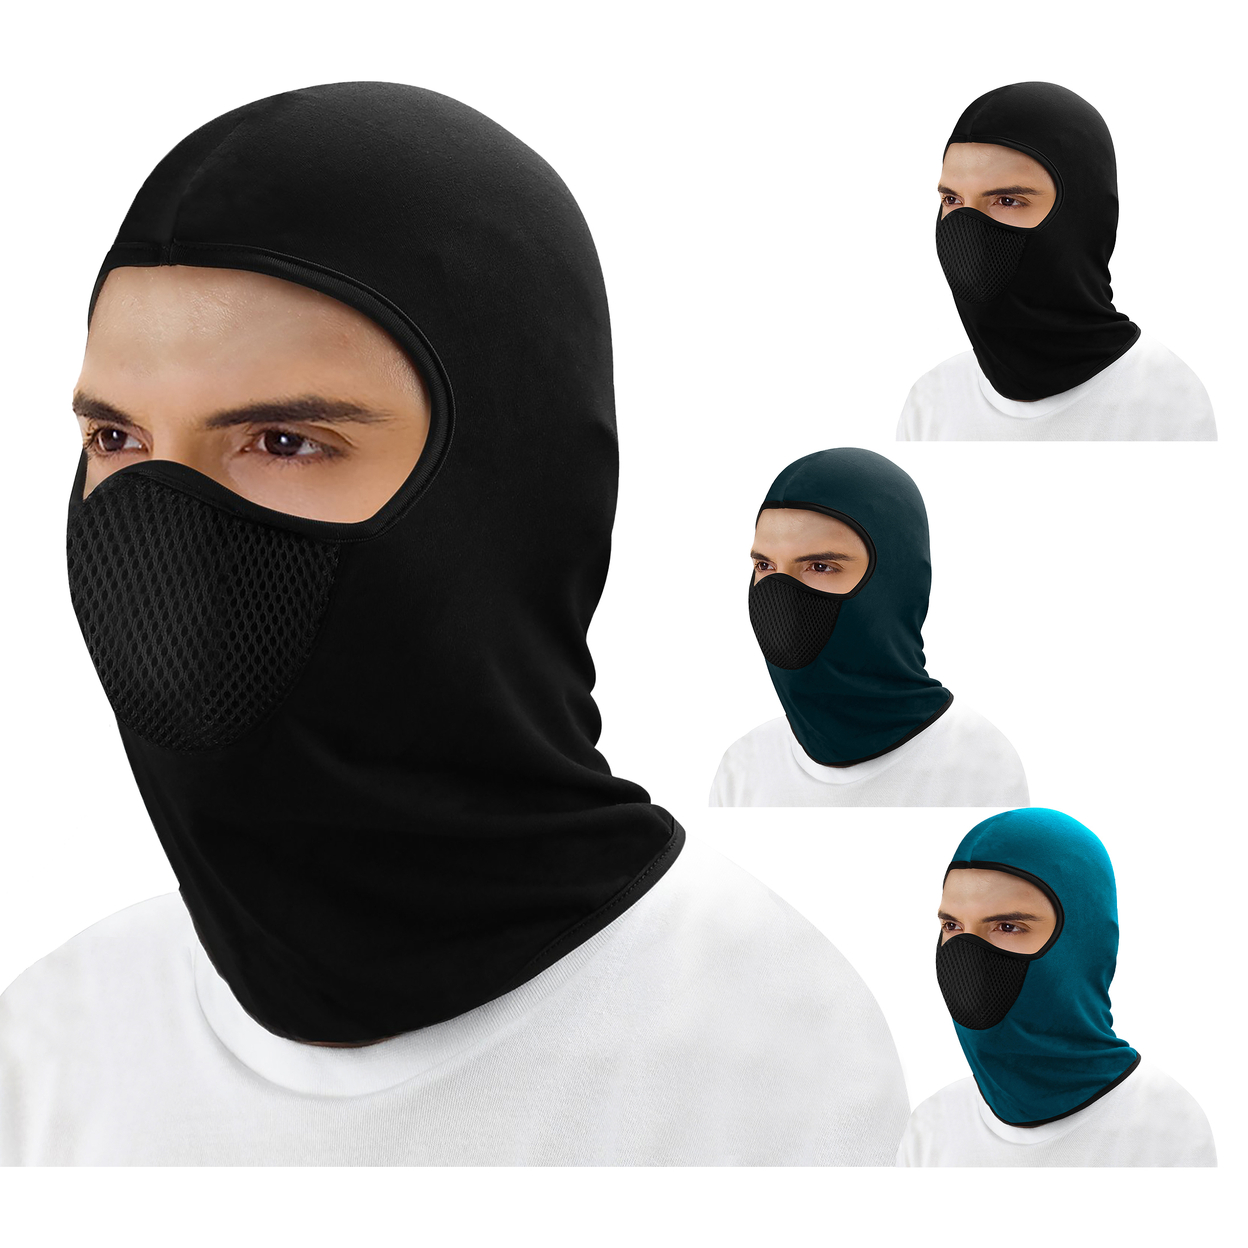 Men's Warm Winter Windproof Breathable Cozy Thermal Balaclava Winter Ski Full Face Mask - Navy